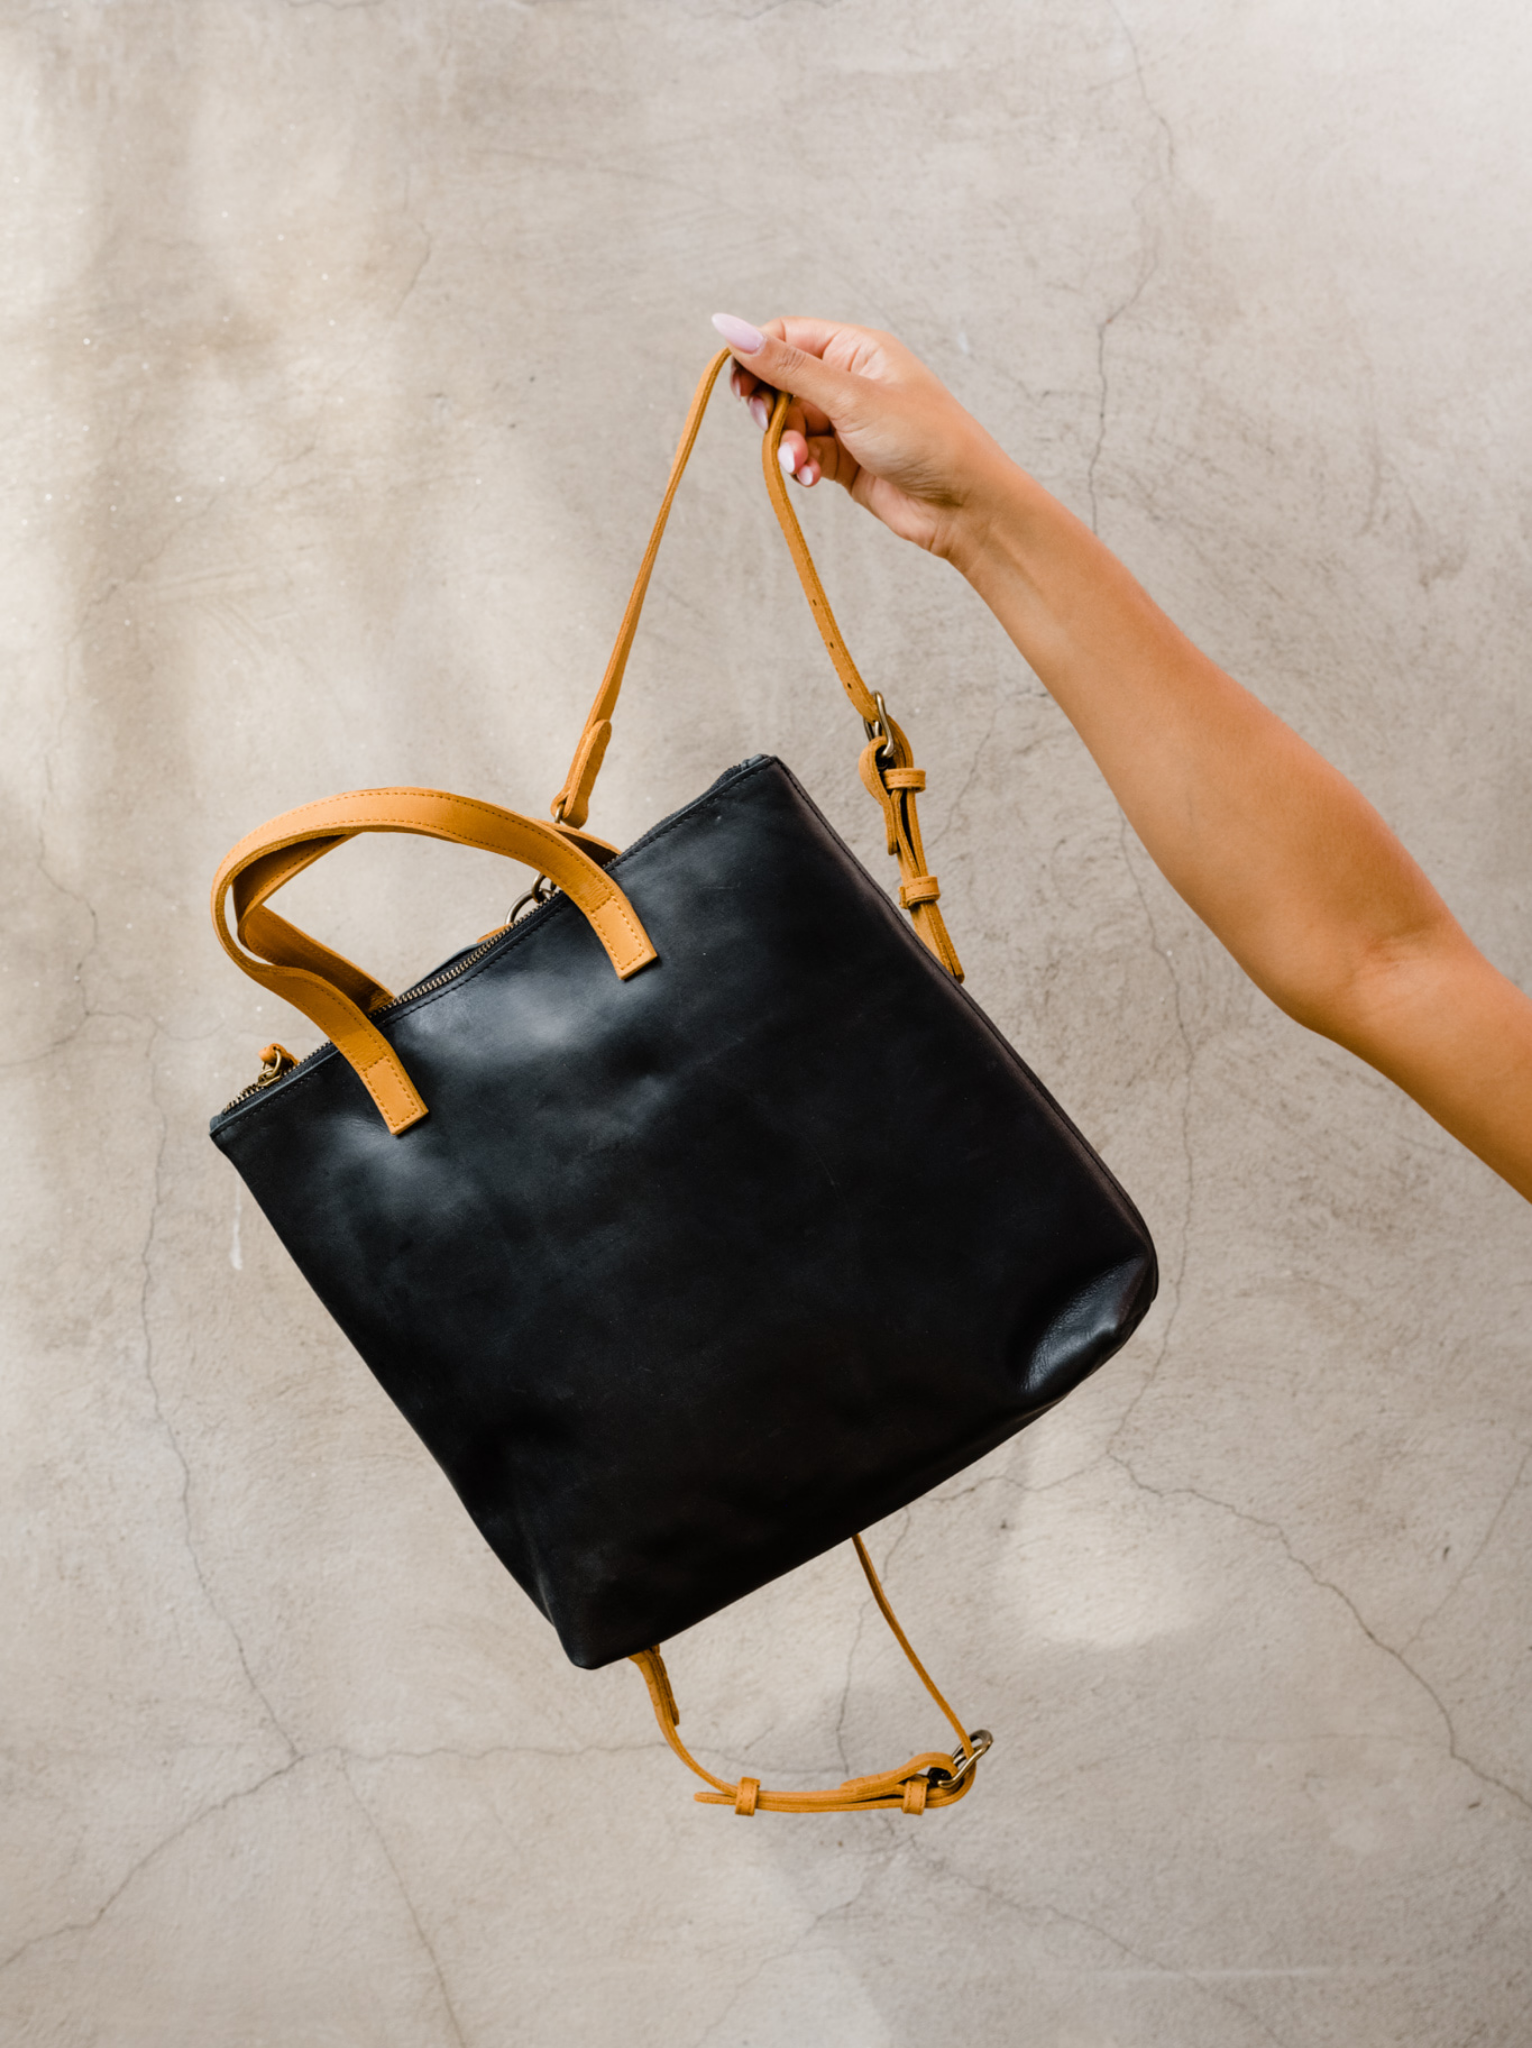 A person's hand holding a black leather bag with a tan strap against a textured background.